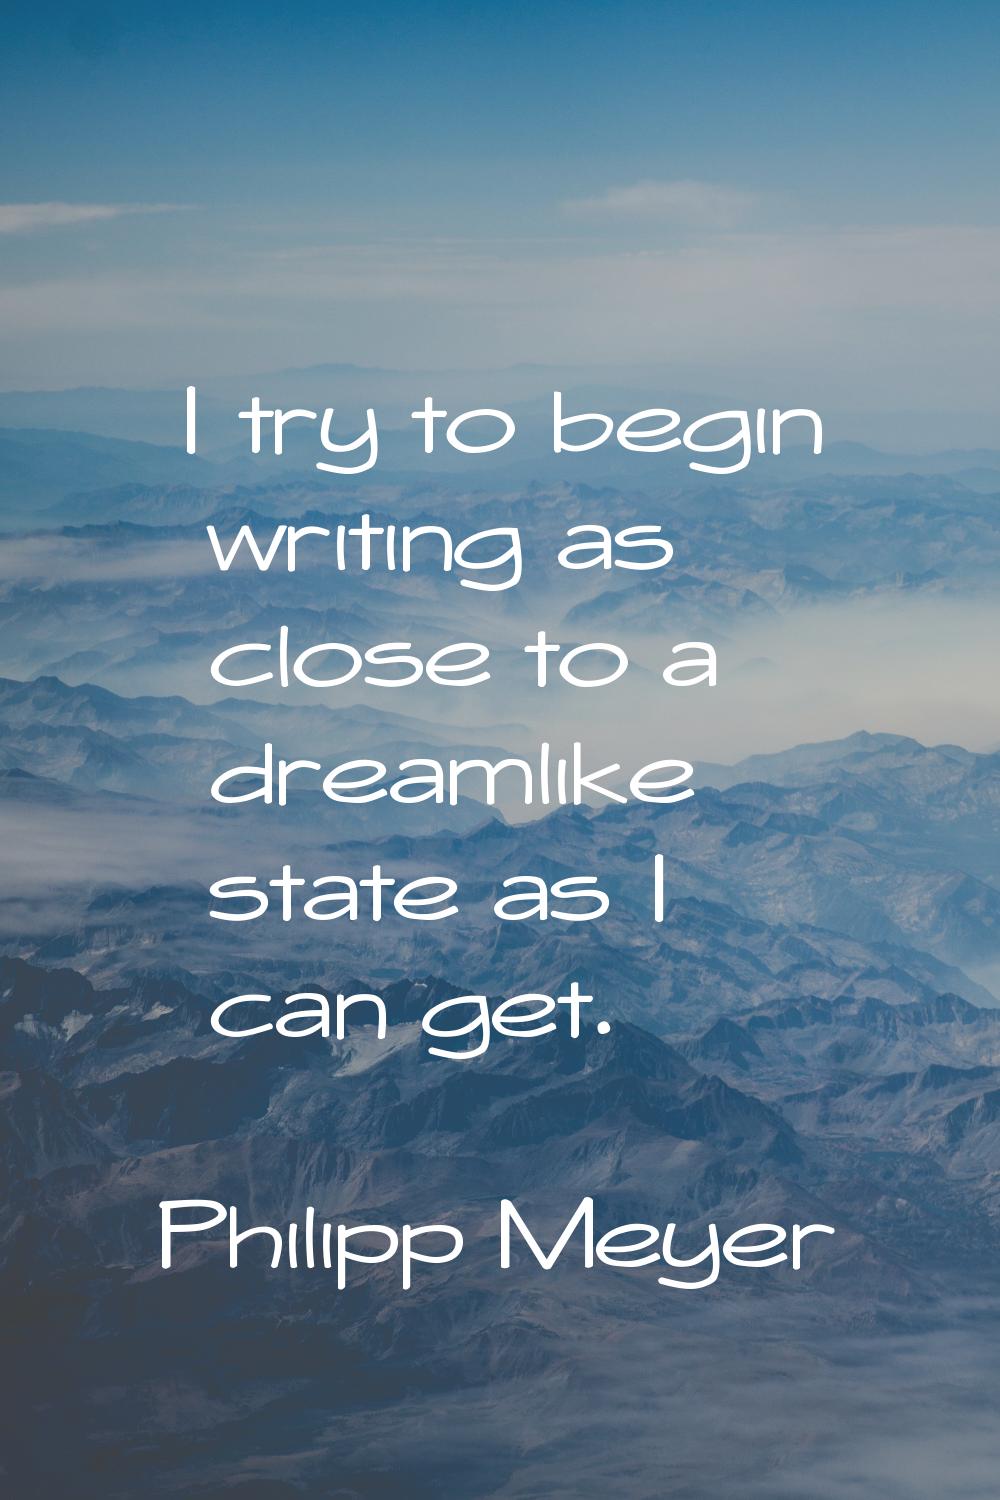 I try to begin writing as close to a dreamlike state as I can get.